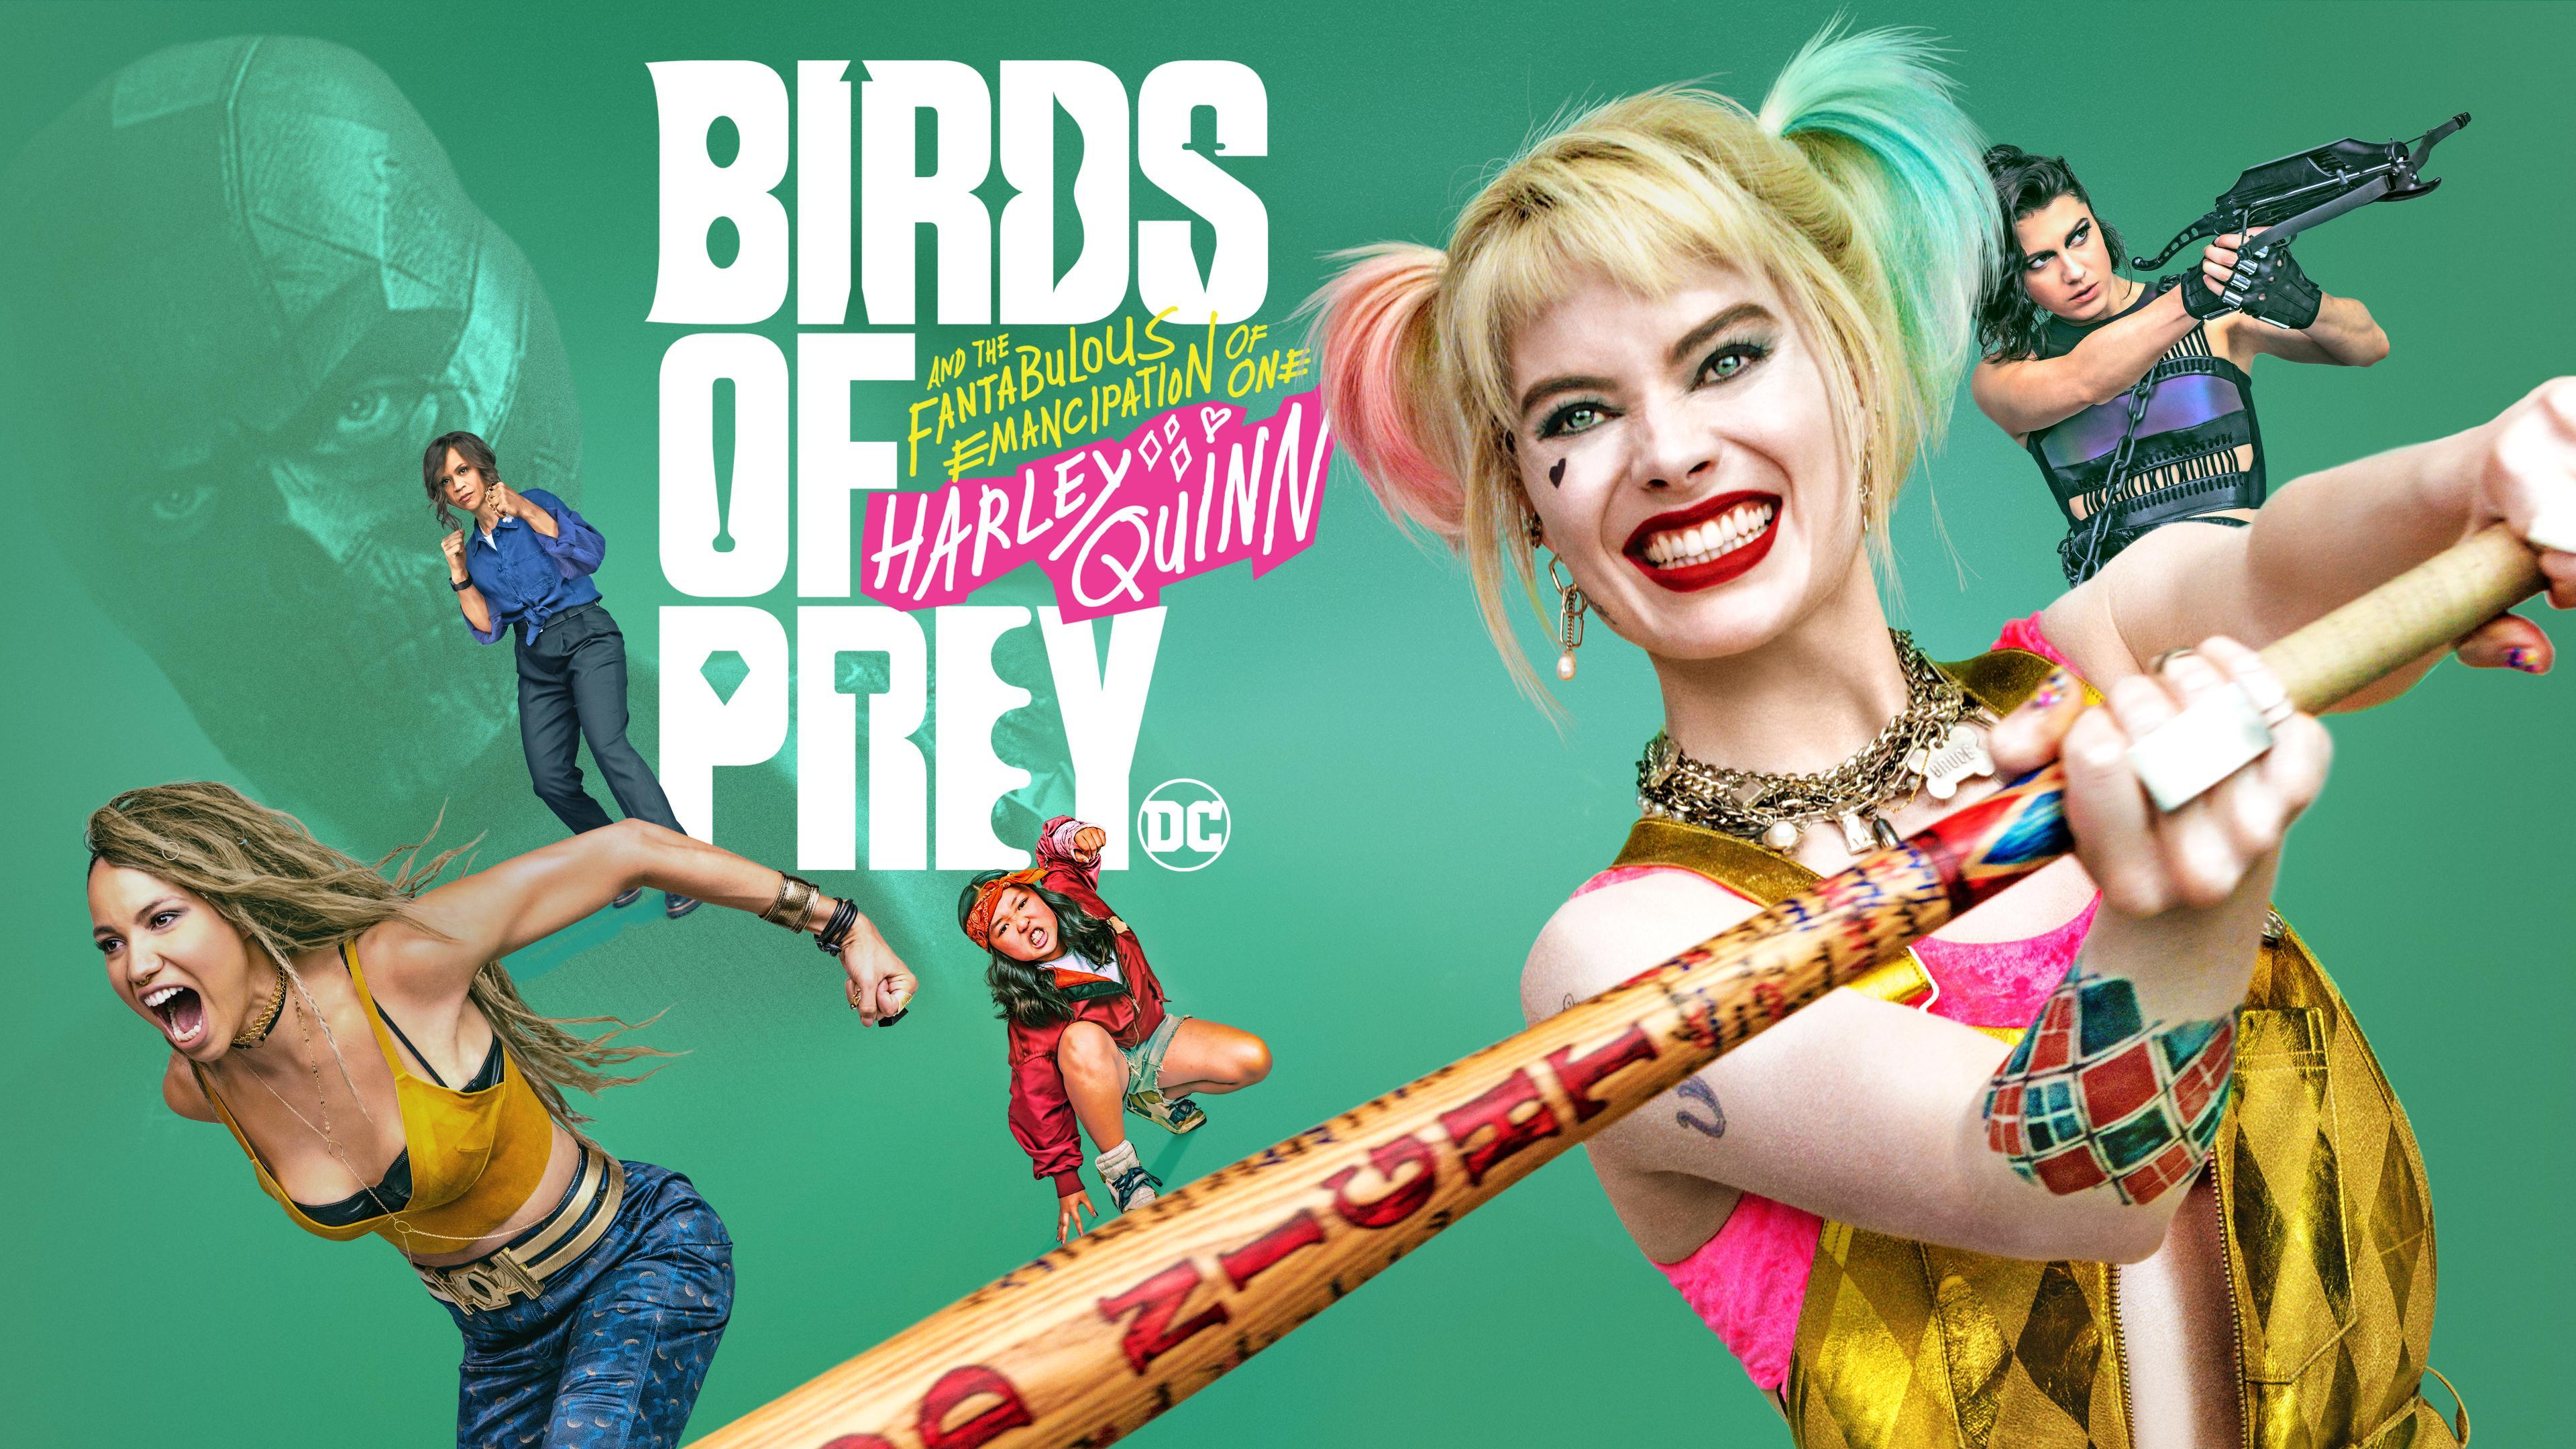 Watch Birds Of Prey And the Fantabulous Emancipation of One Harley Quinn